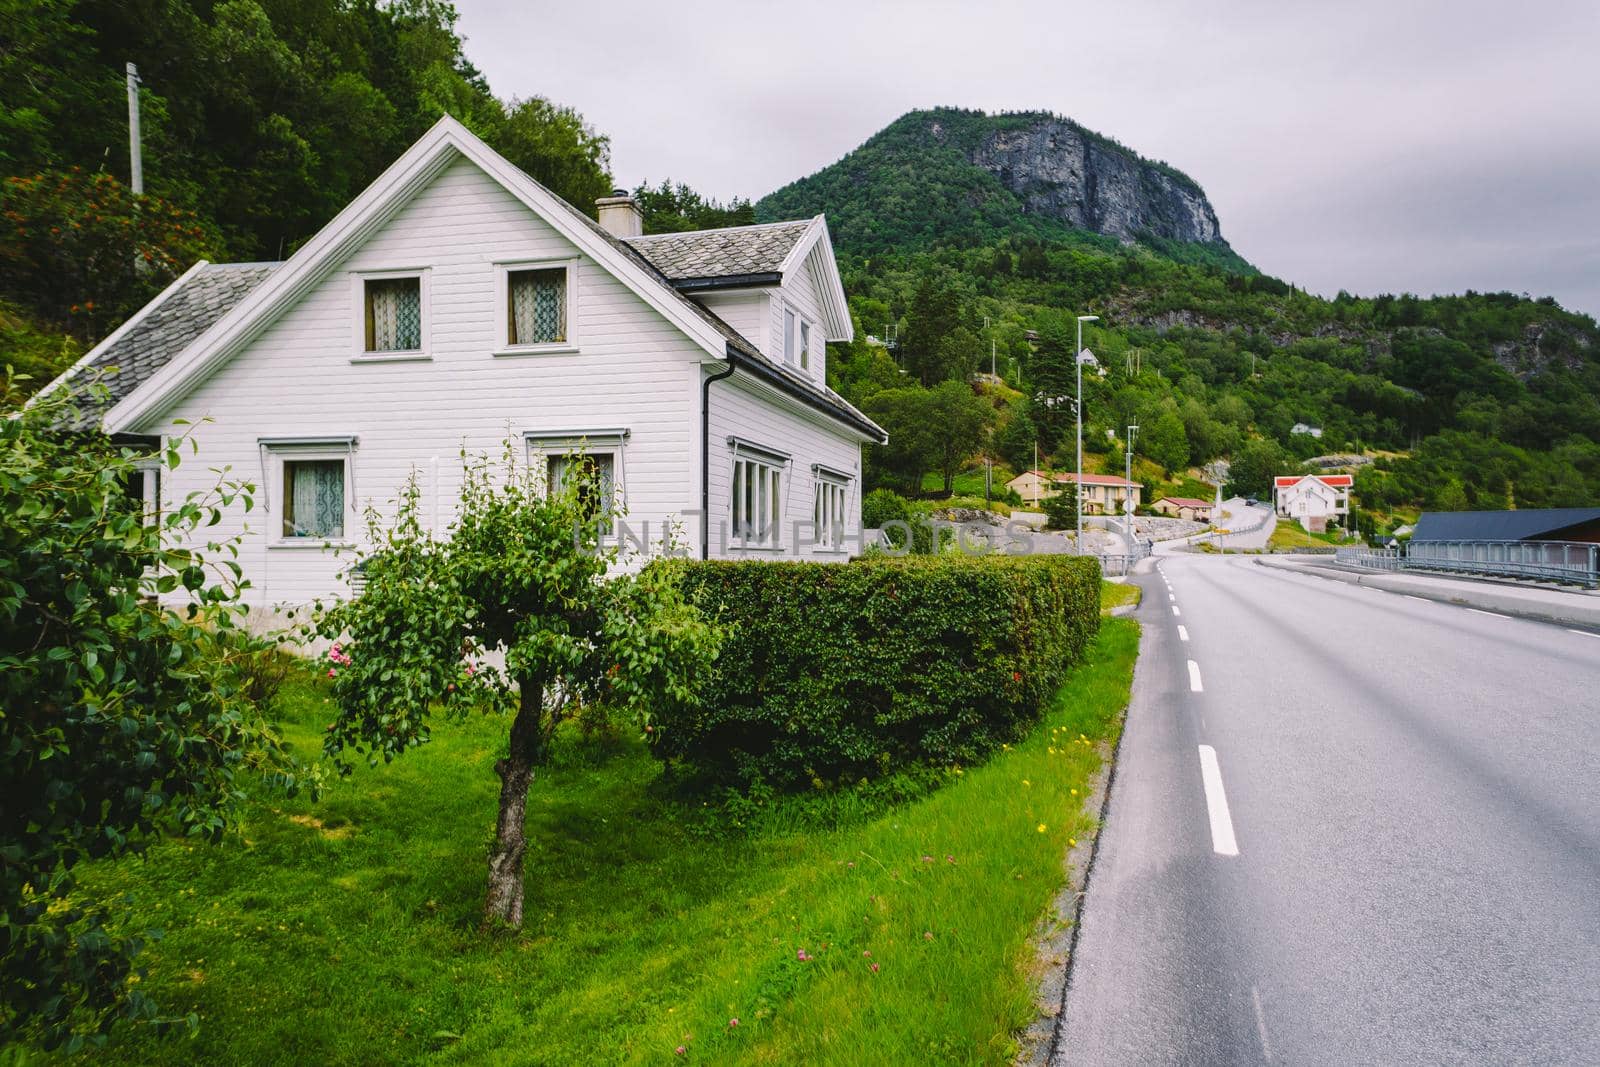 Cityscape with white spaced-out traditional house in norway. Norway house, traditional Scandinavian country hut in village. White Wooden House In Norway. Old wooden architecture in Norway. White home.